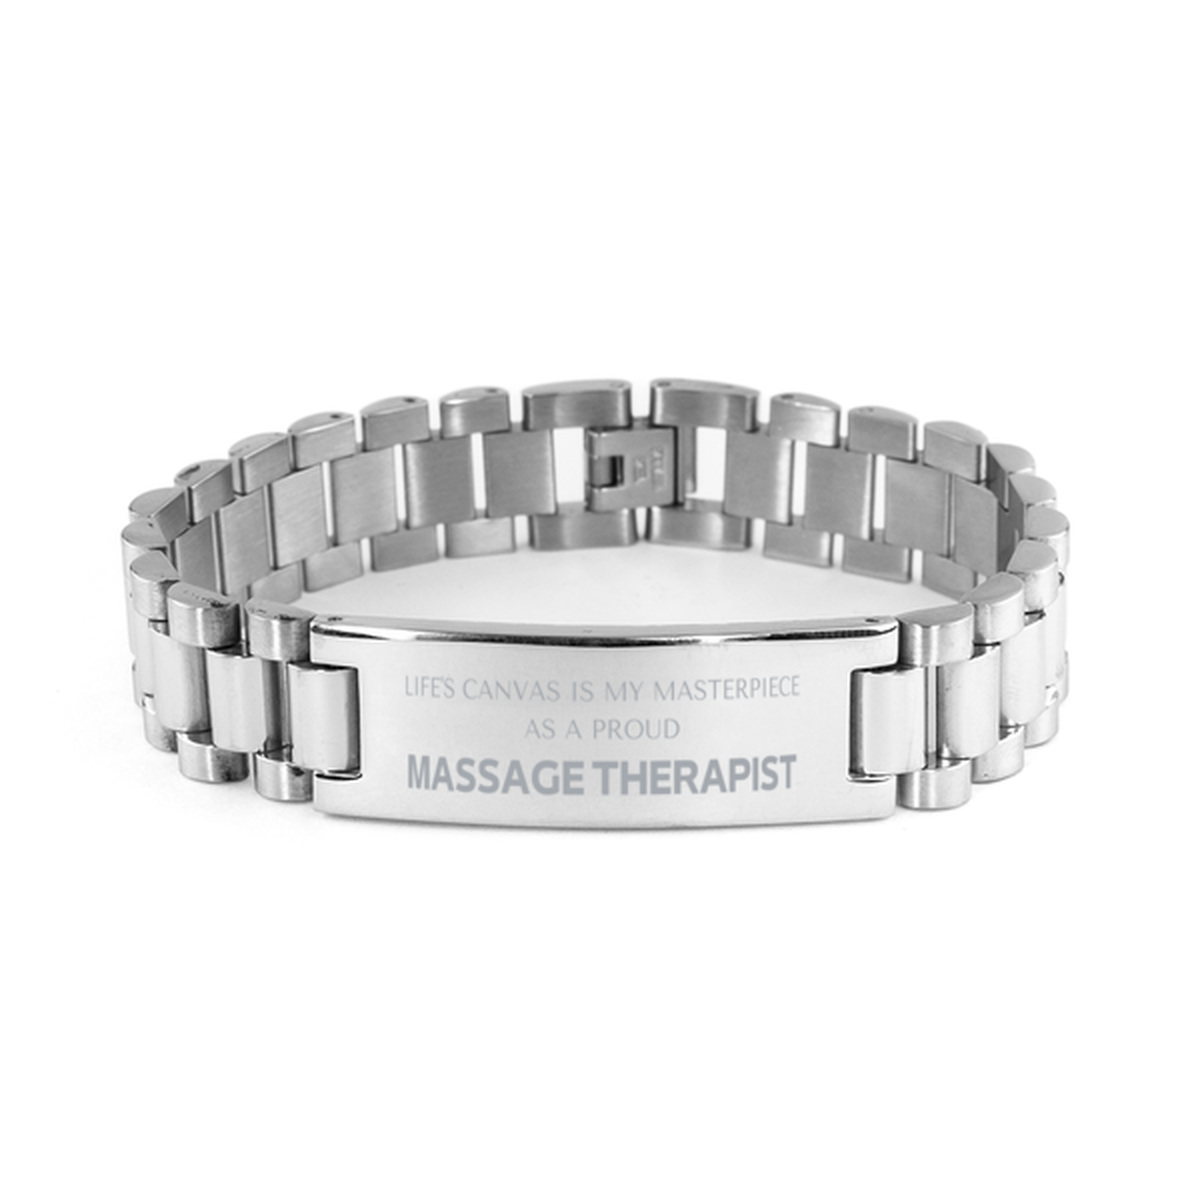 Proud Massage Therapist Gifts, Life's canvas is my masterpiece, Epic Birthday Christmas Unique Ladder Stainless Steel Bracelet For Massage Therapist, Coworkers, Men, Women, Friends